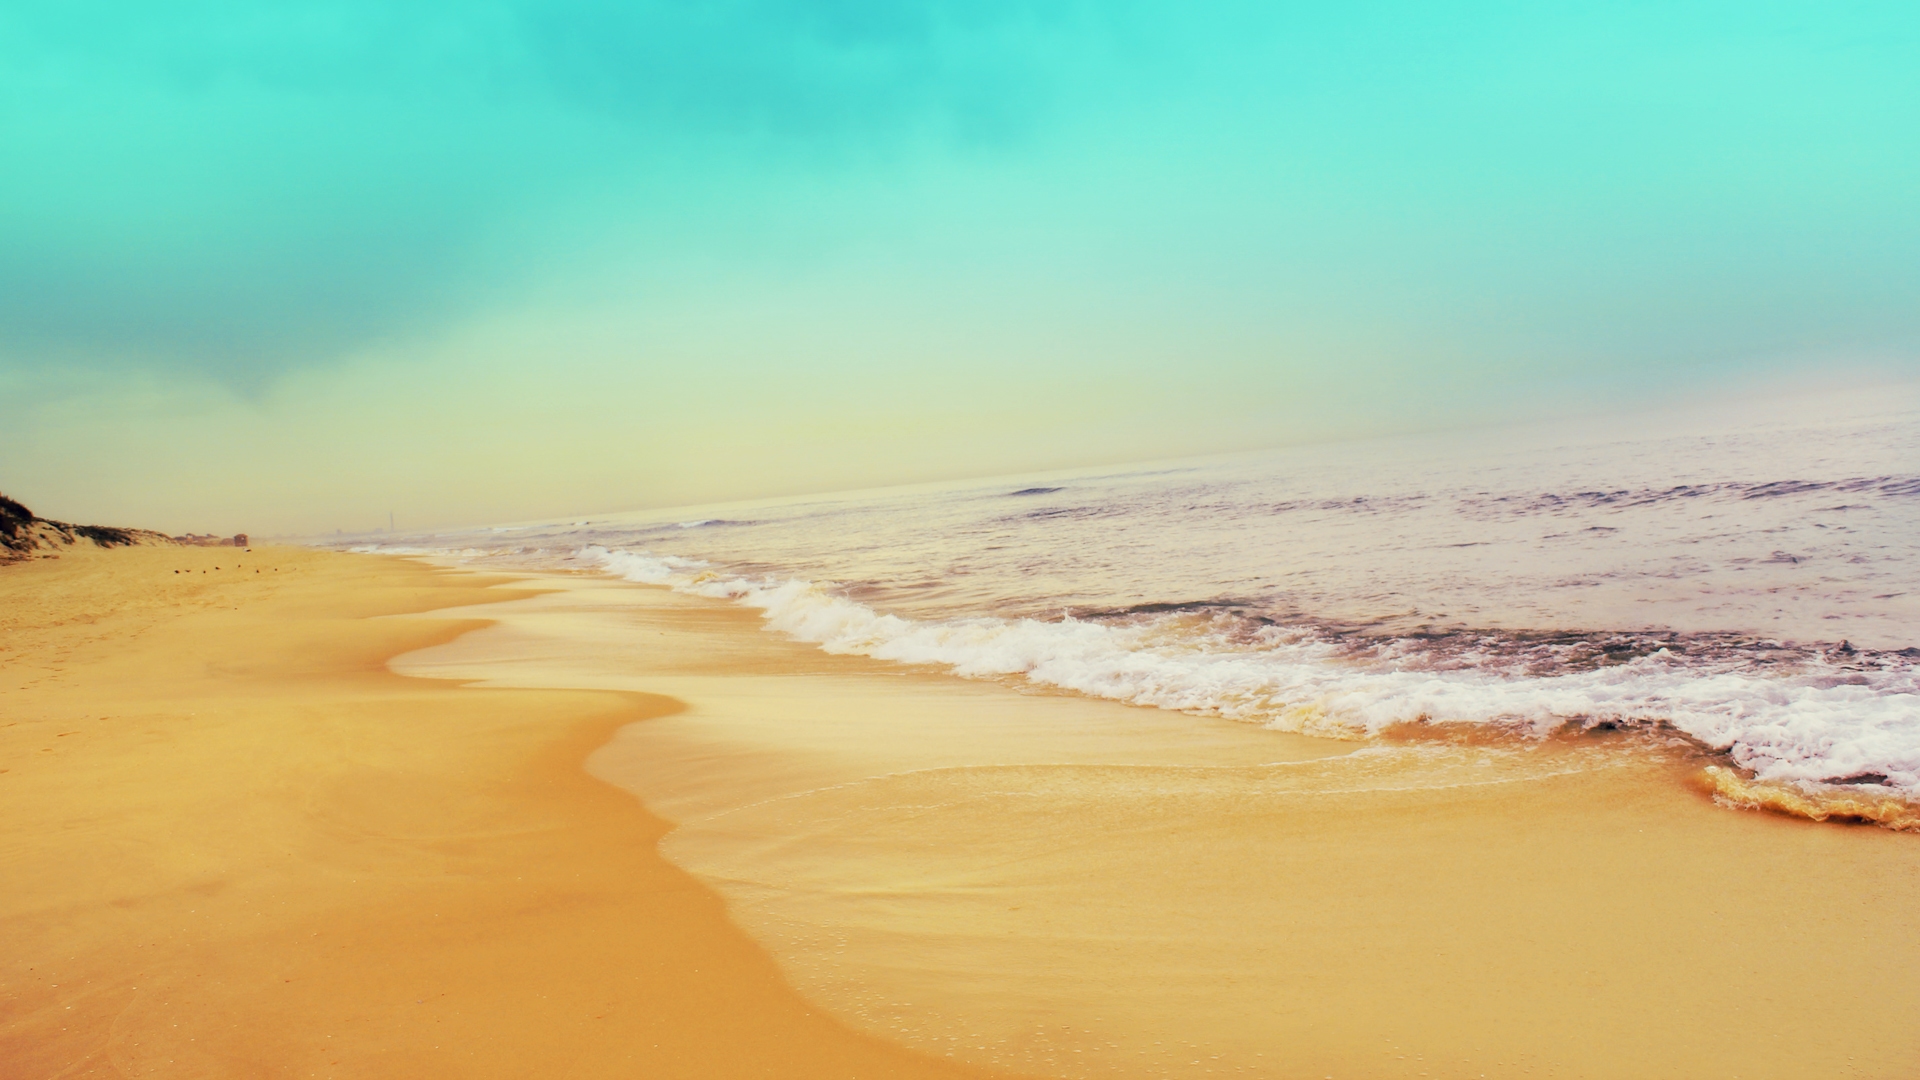 Hd 1920x1080 Sea Water And Beach Desktop Wallpapers Backgrounds 1920x1080